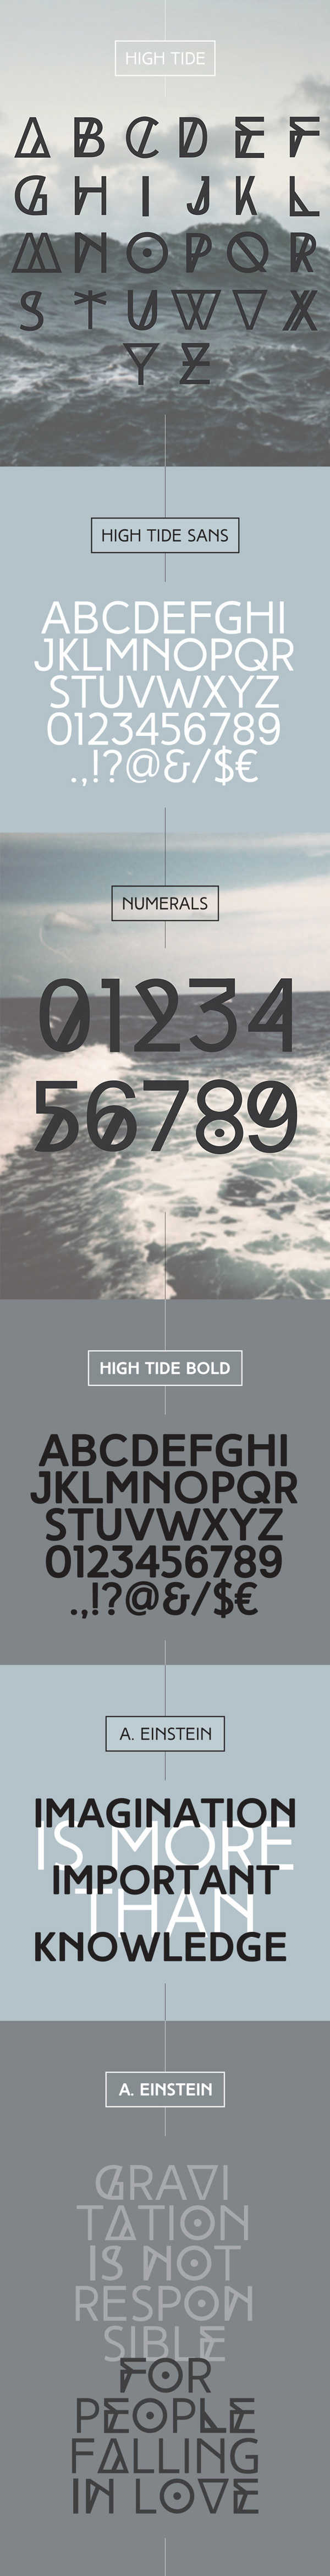 high tide free typeface